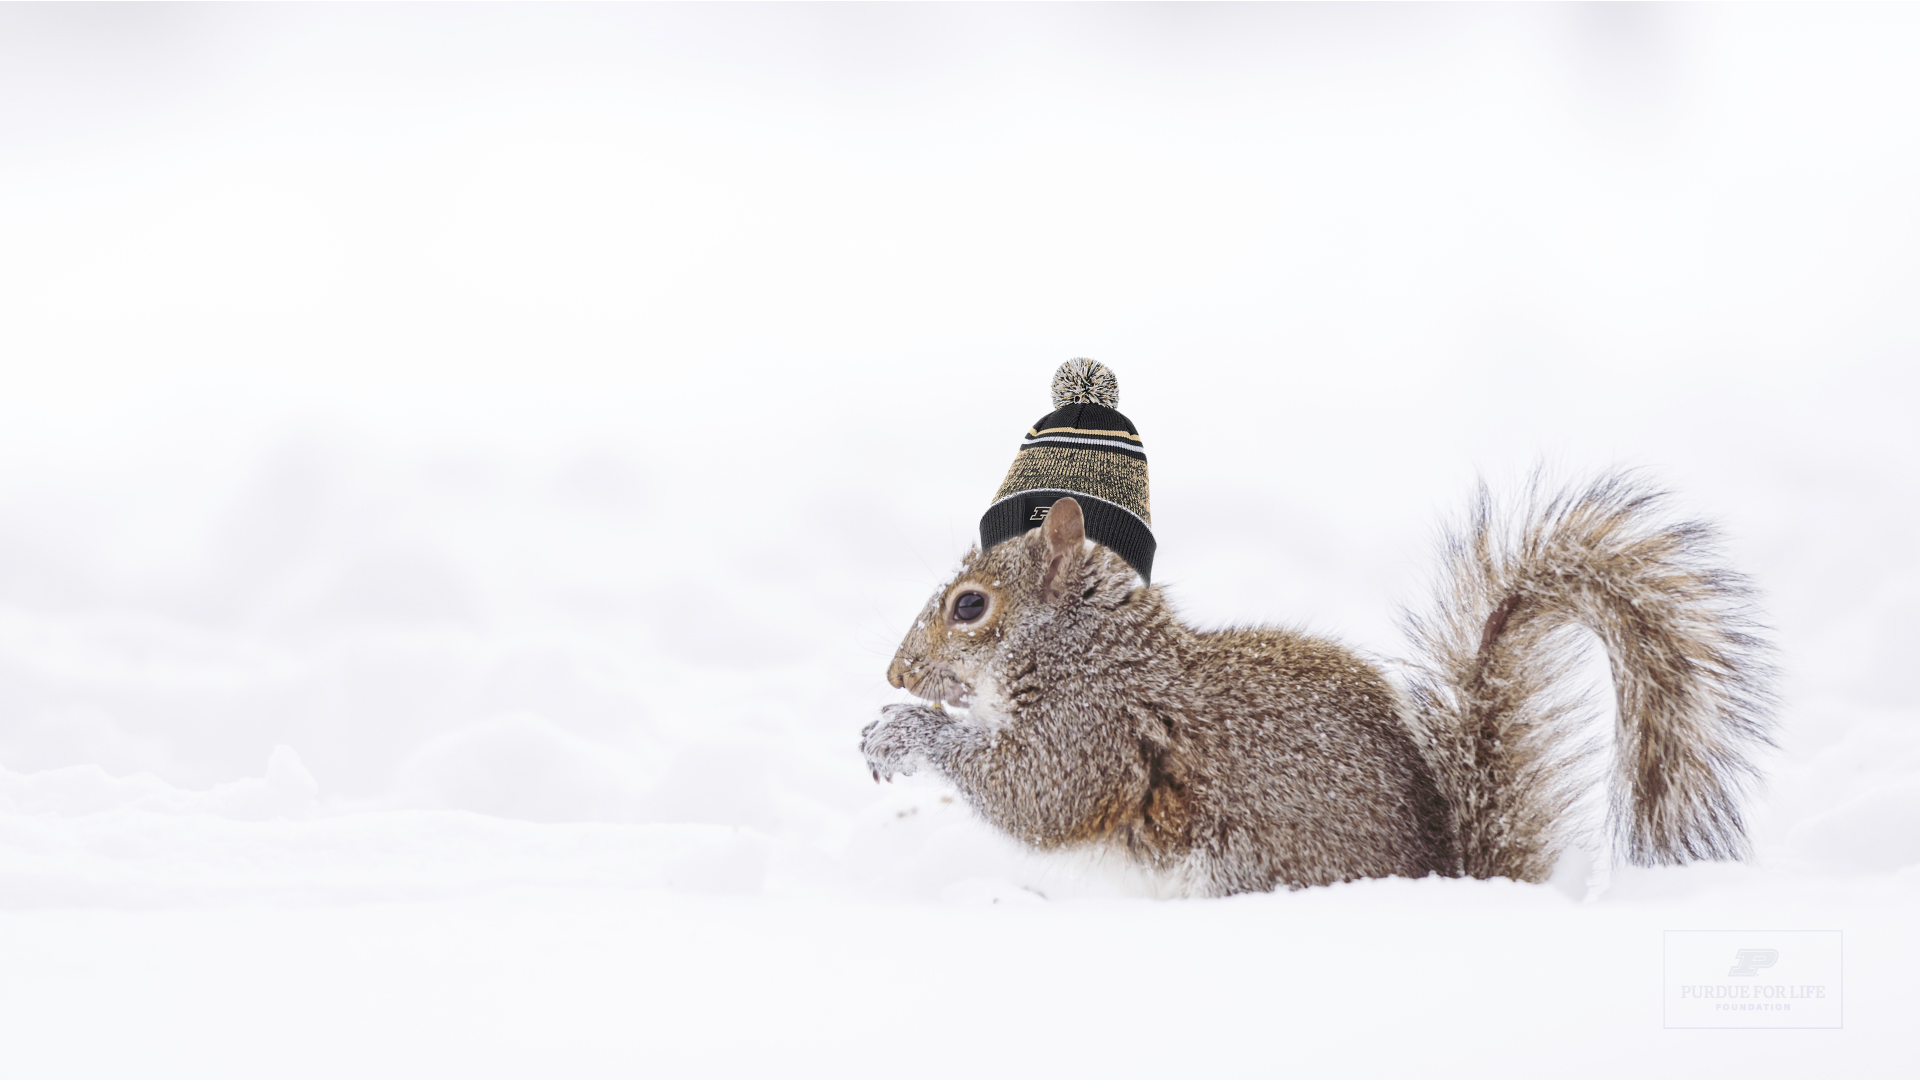 Squirrel with a Purdue hat standing in snow.